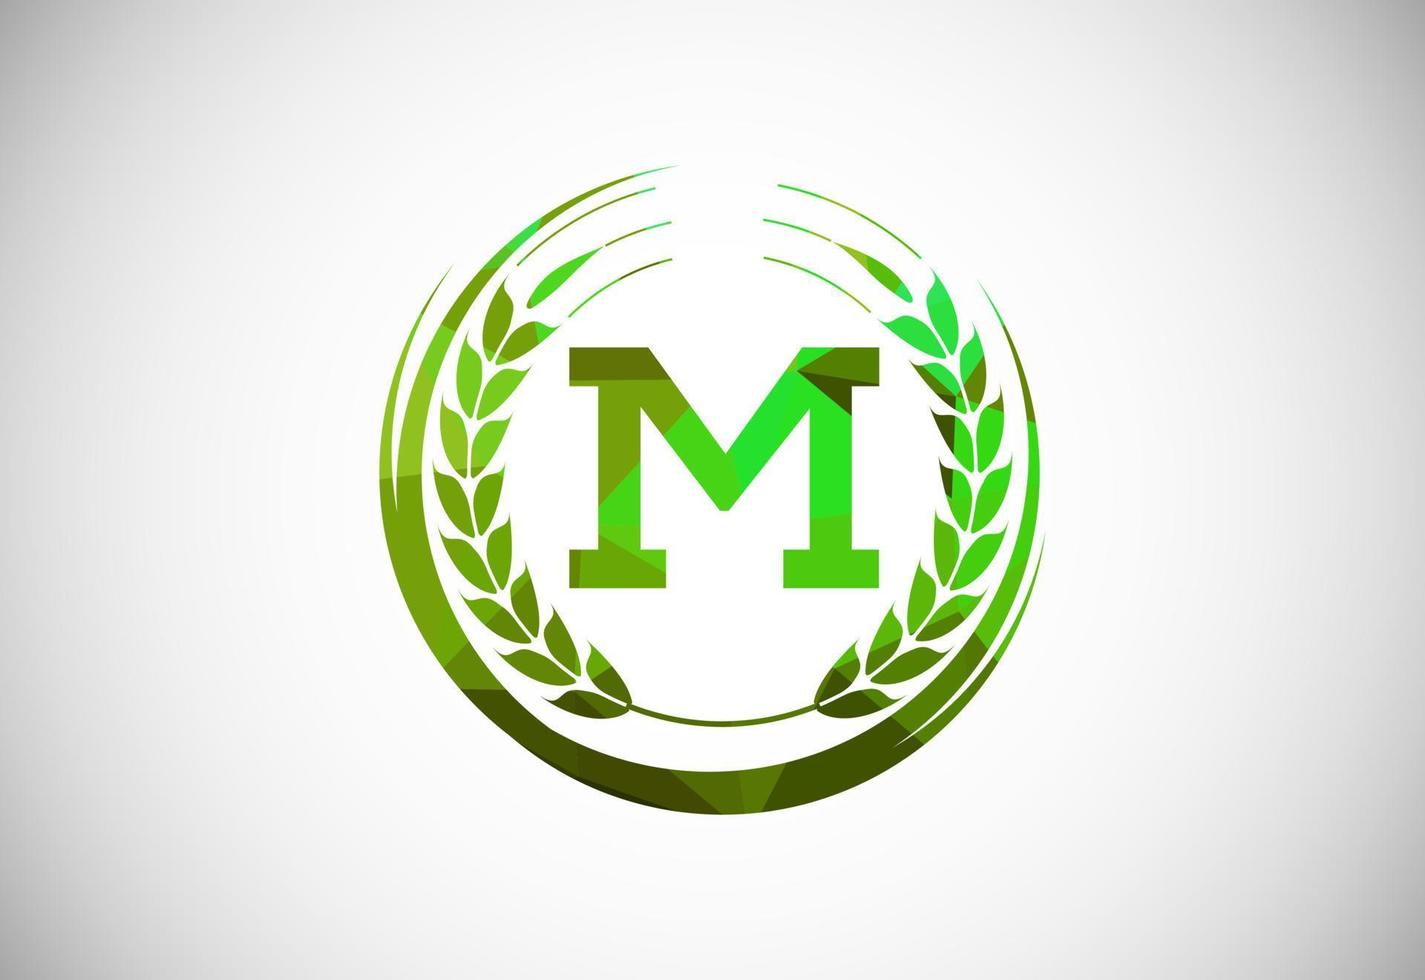 Alphabet M sign with a wheat wreath. Polygonal low poly organic wheat farming logo concept. Agriculture logo design vector template.